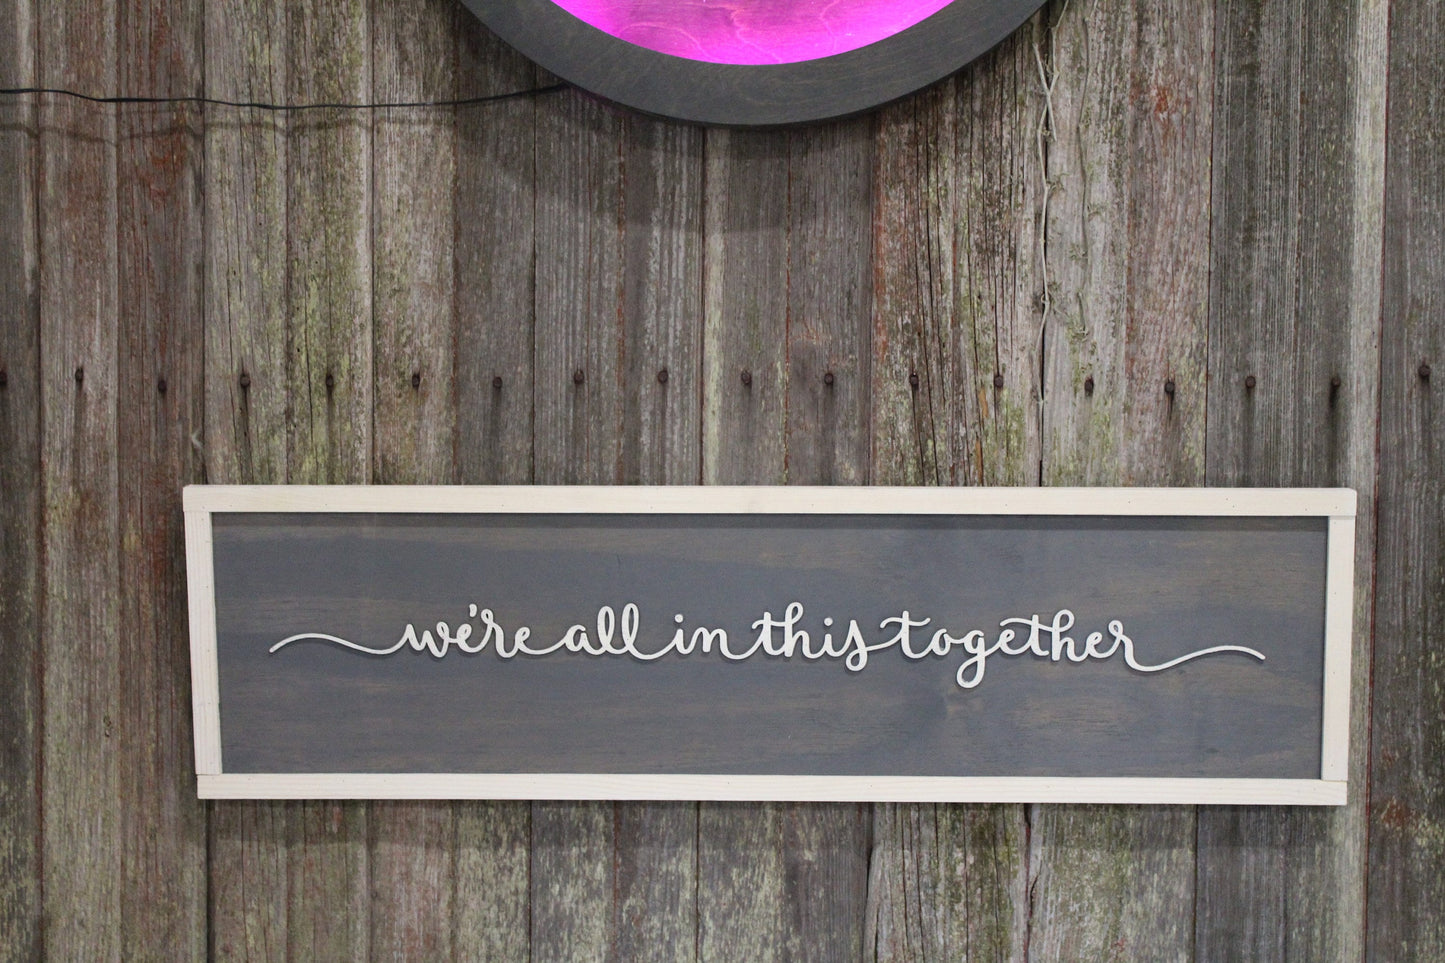 We're All In This Together Script Text Sign Handmade Wood 3D Raised Text Rustic Primitive Wall Decor Shabby Chic Minimalist Wall Art Simple